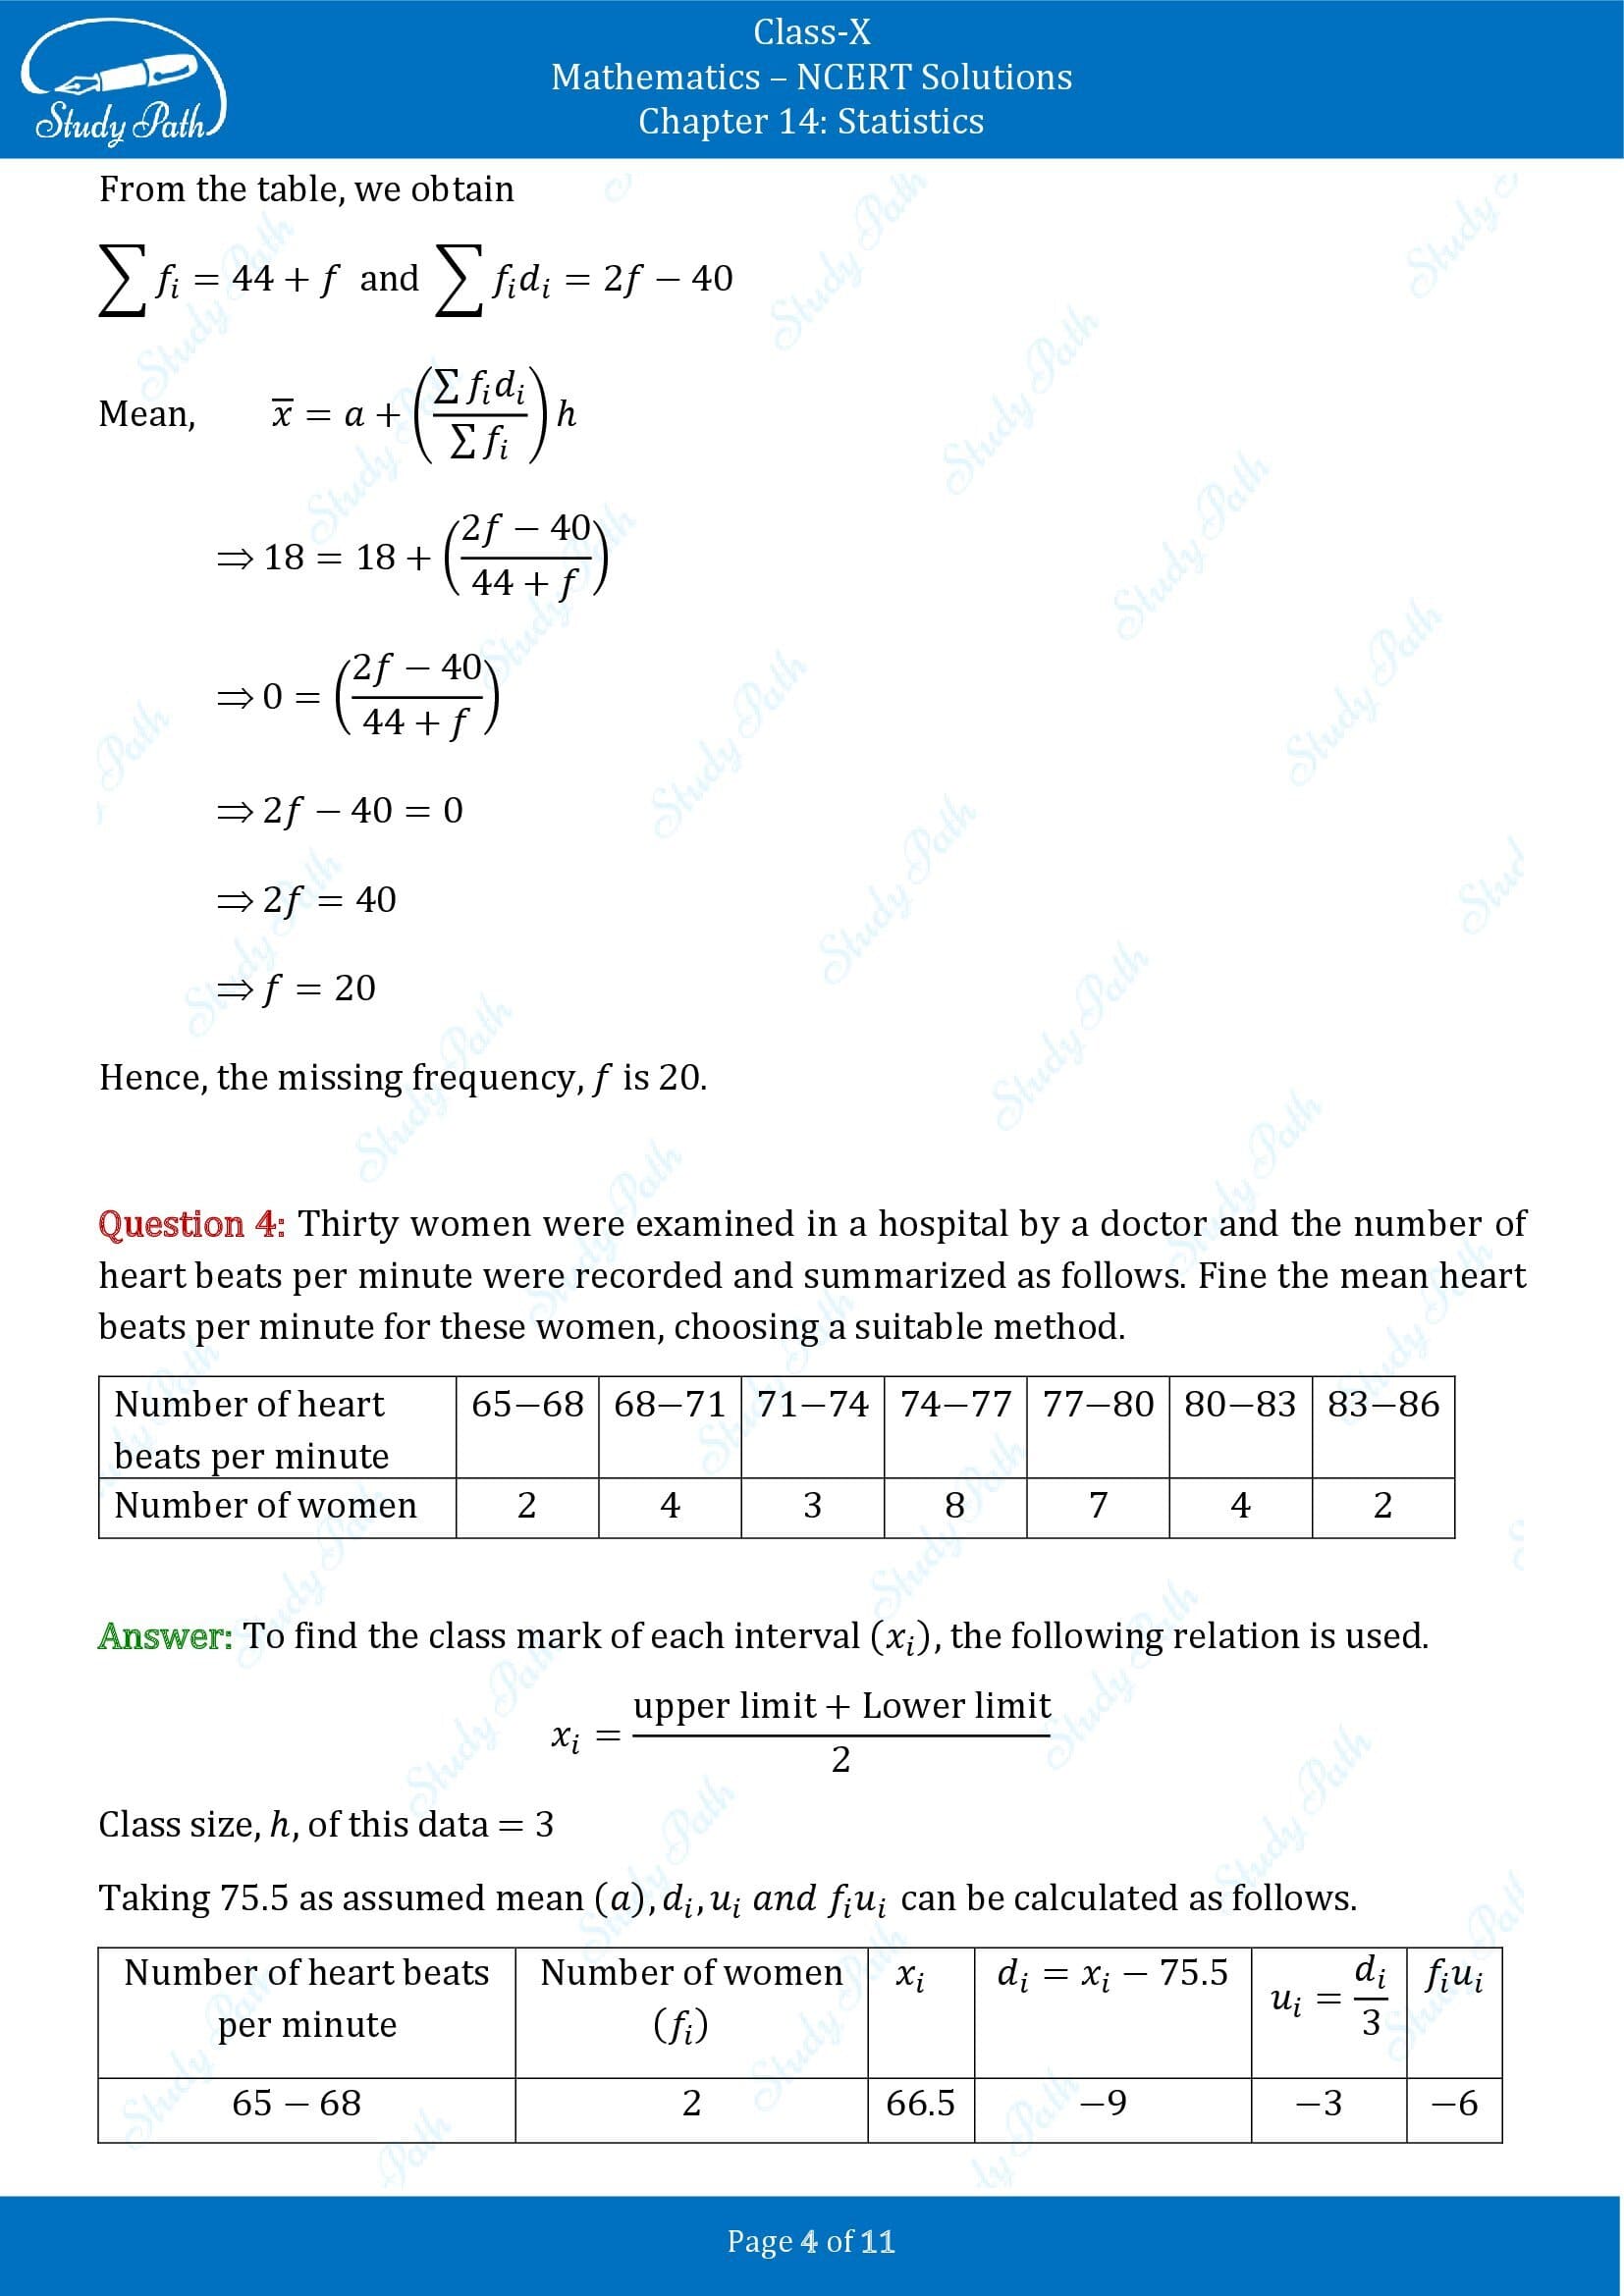 NCERT Solutions for Class 10 Maths Chapter 14 Statistics Exercise 14.1 00004